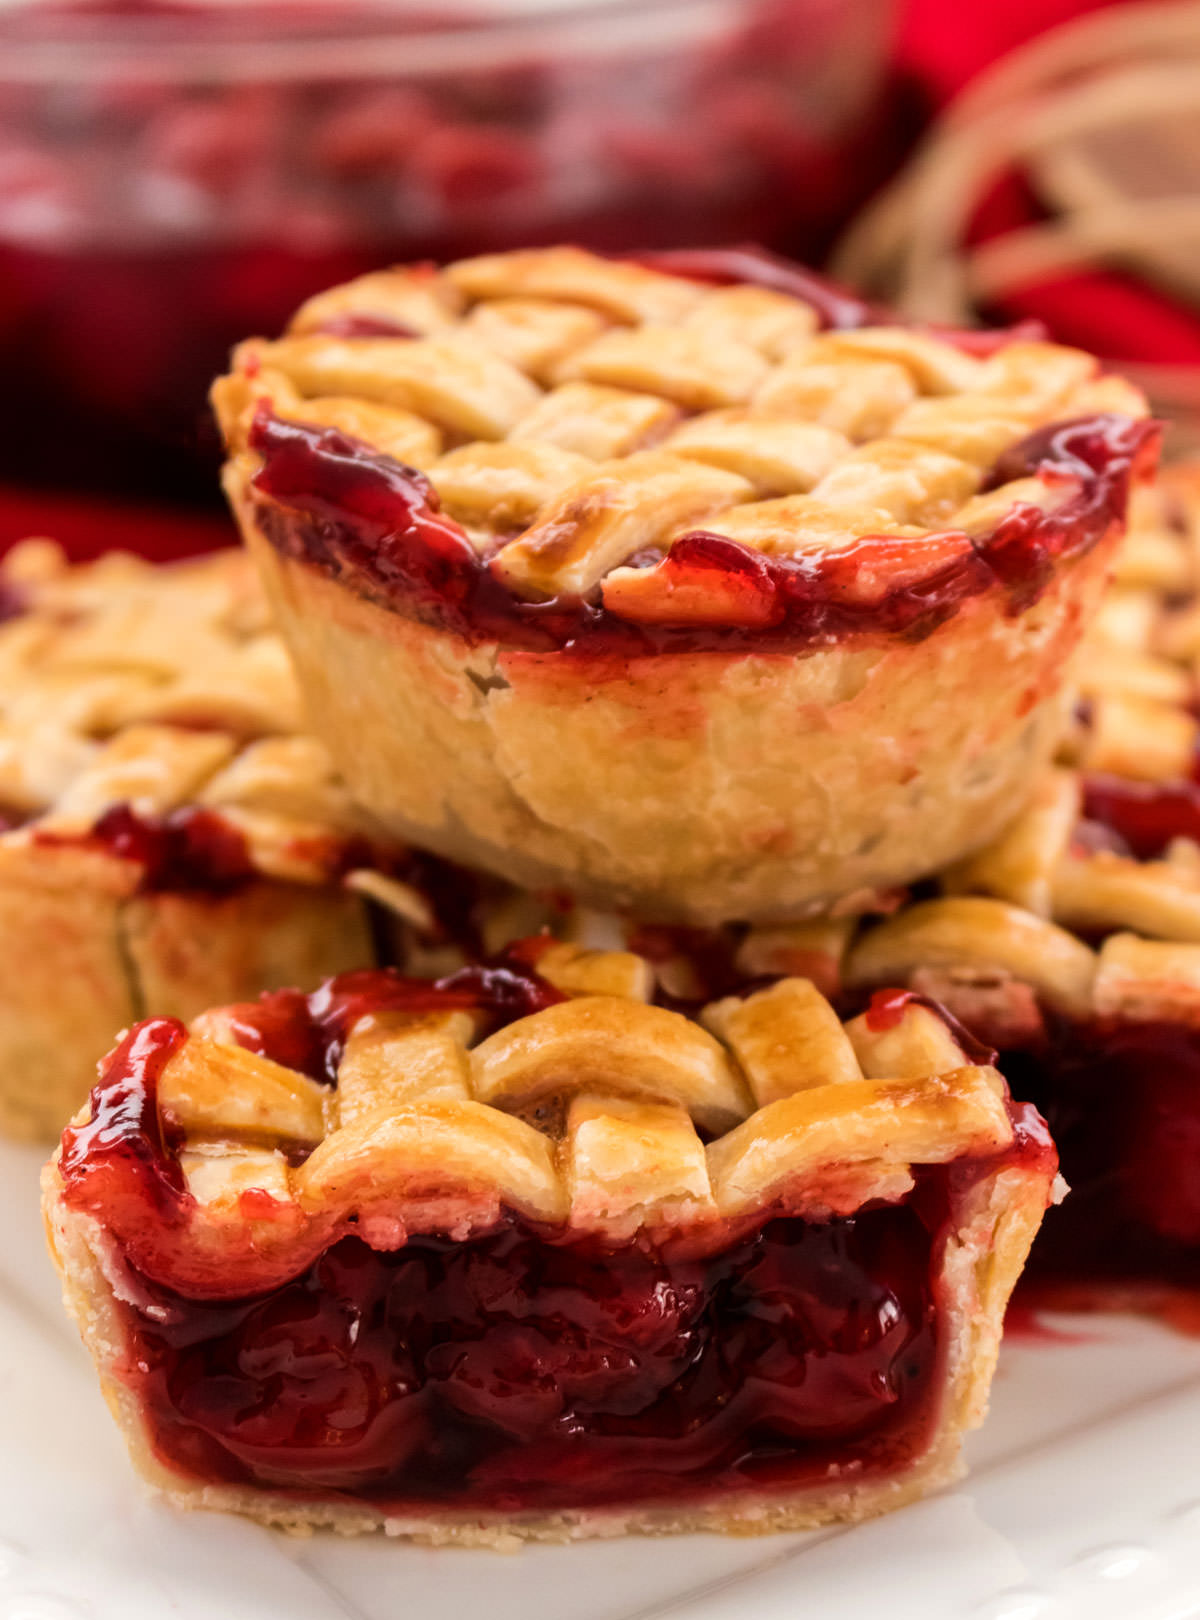 Closeup on a stack of Mini Cherry Pies sitting on a white plate, one of the Mini Pies is cut in half so you can see the Cherry Filling inside.